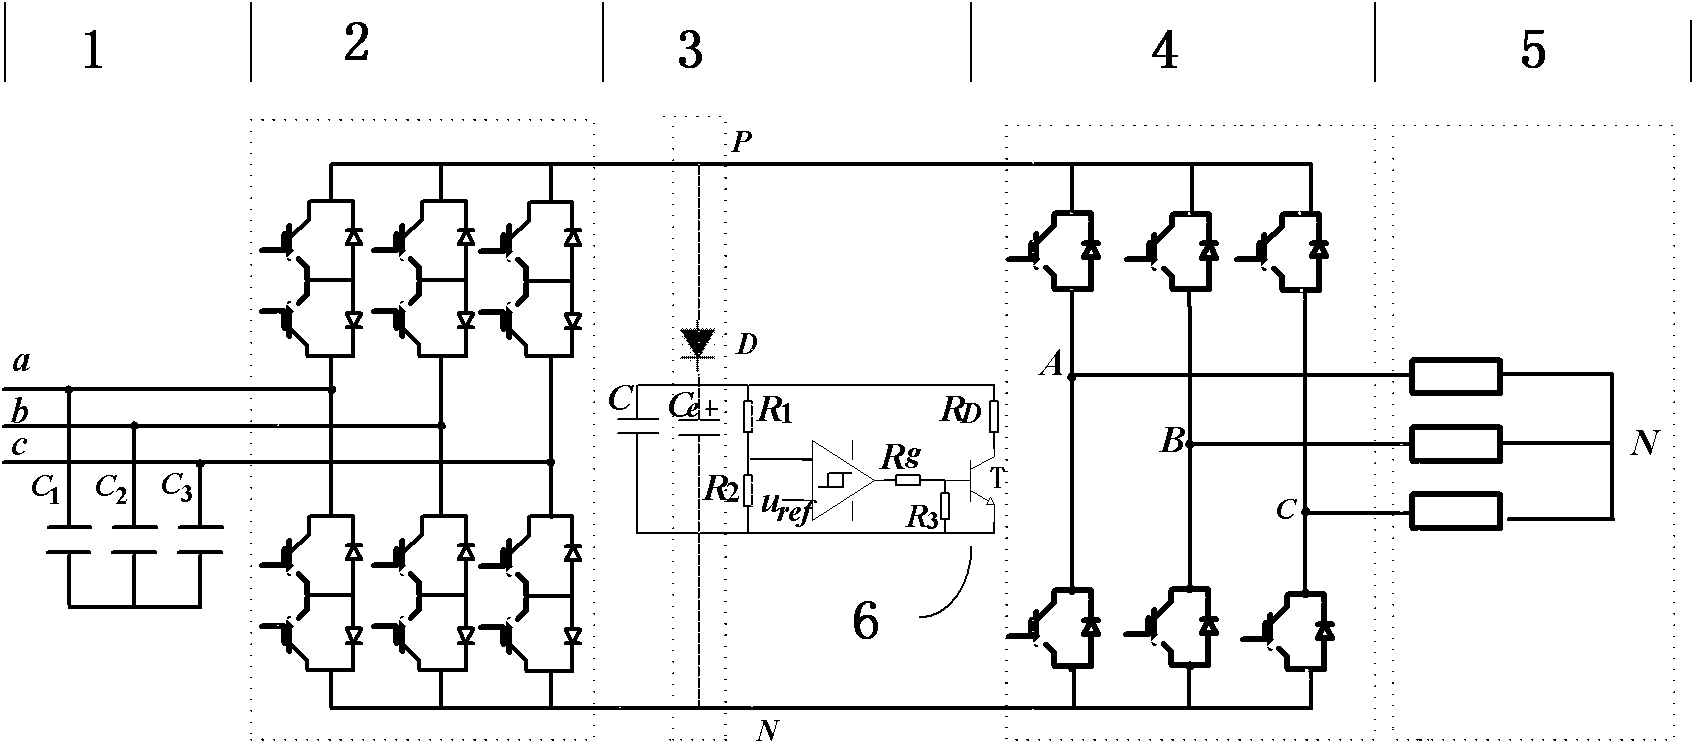 Clamping absorption integrated circuit for two-stage matrix converter